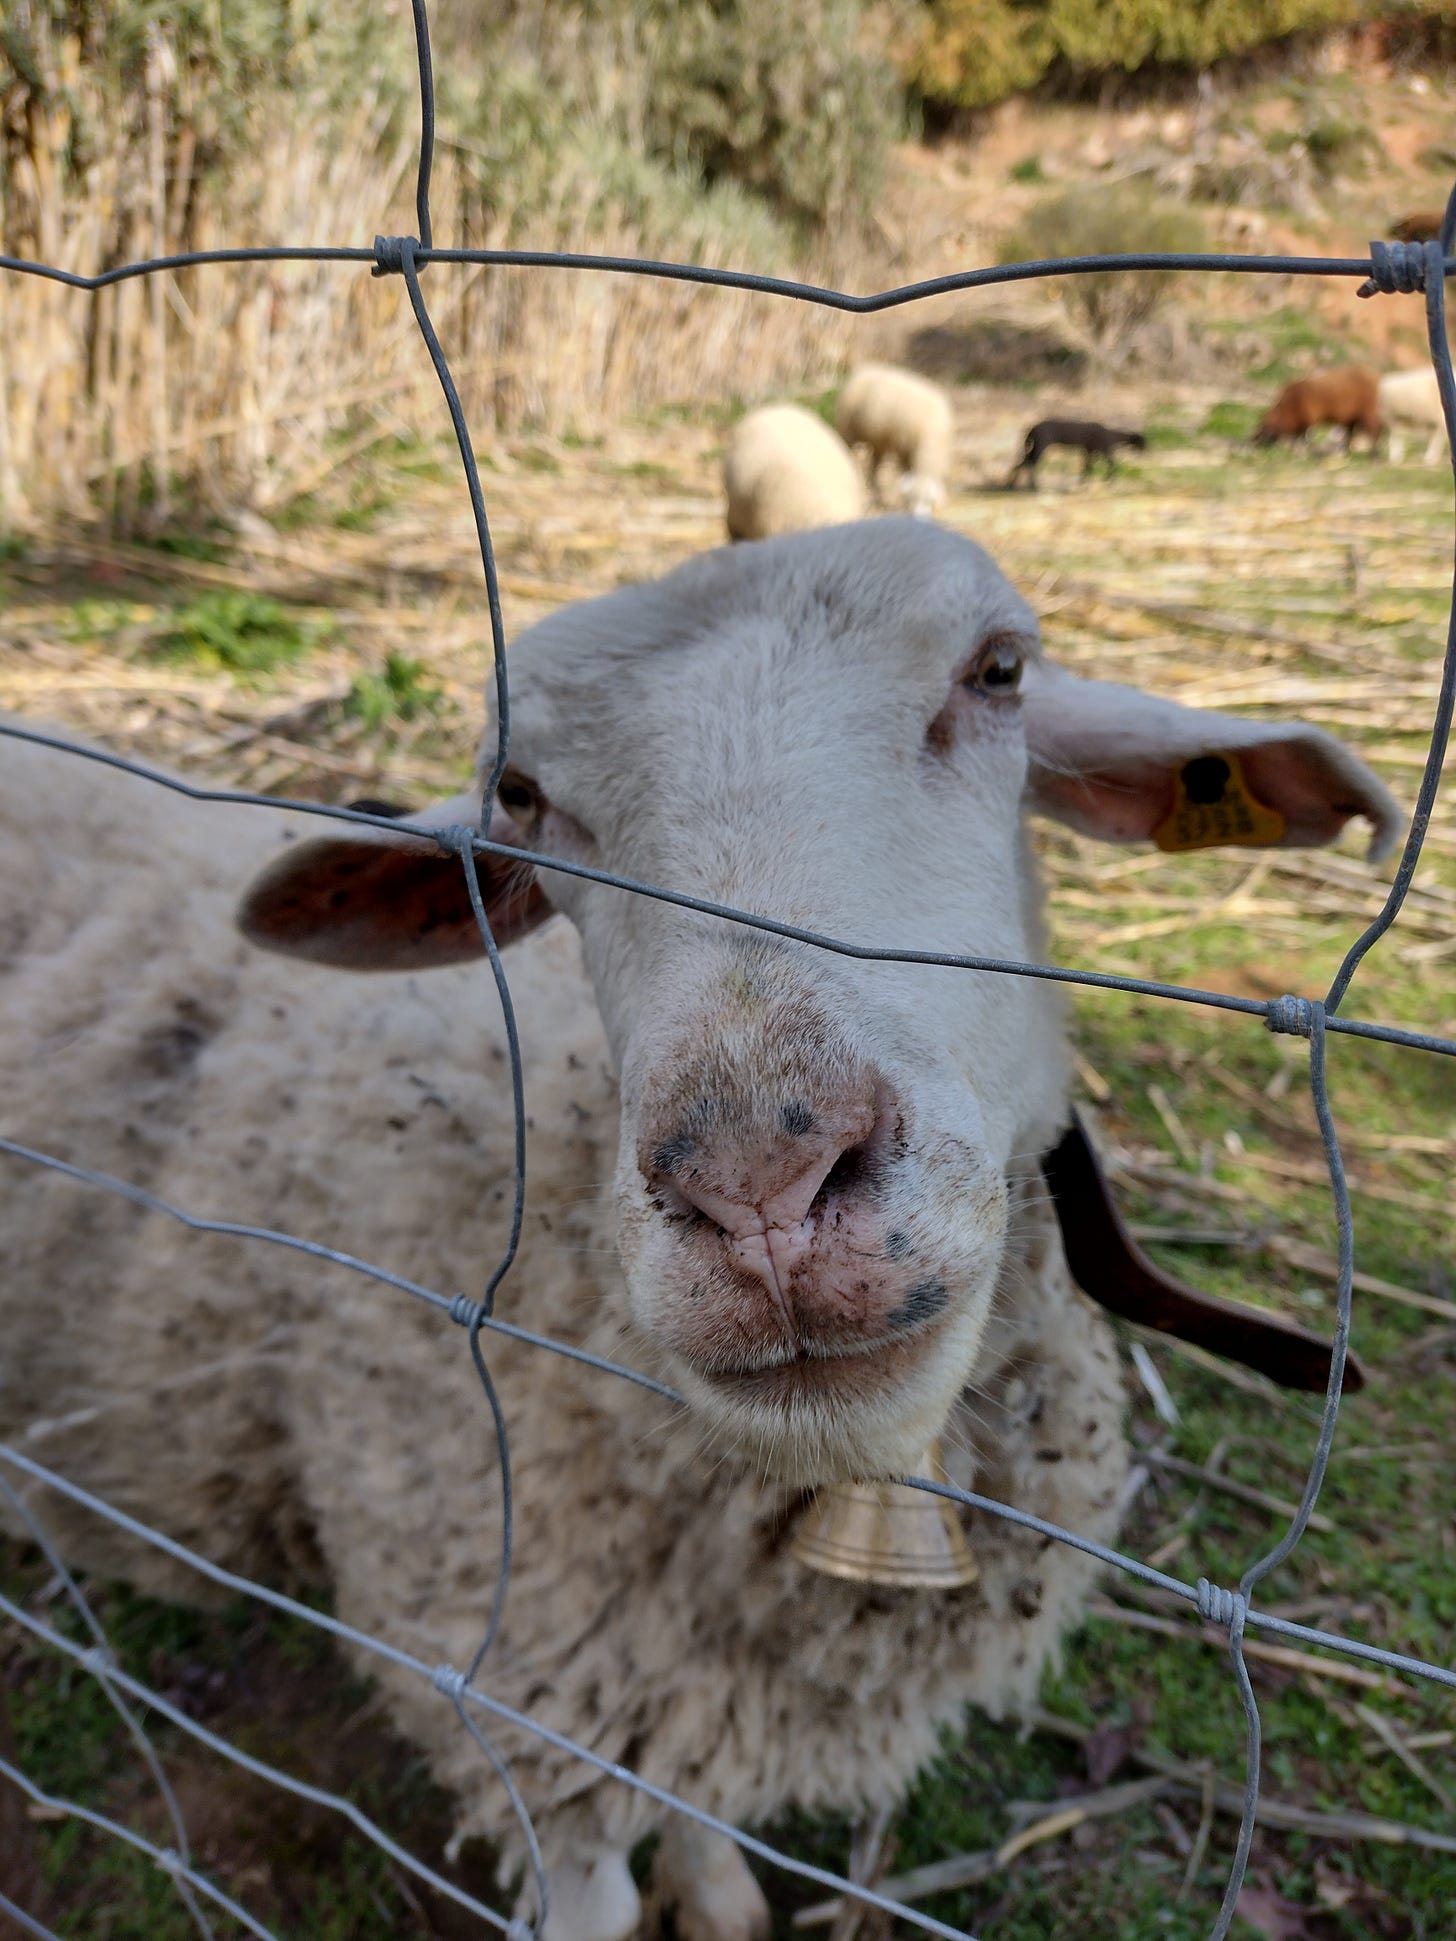 White sheep with brass bell collar.